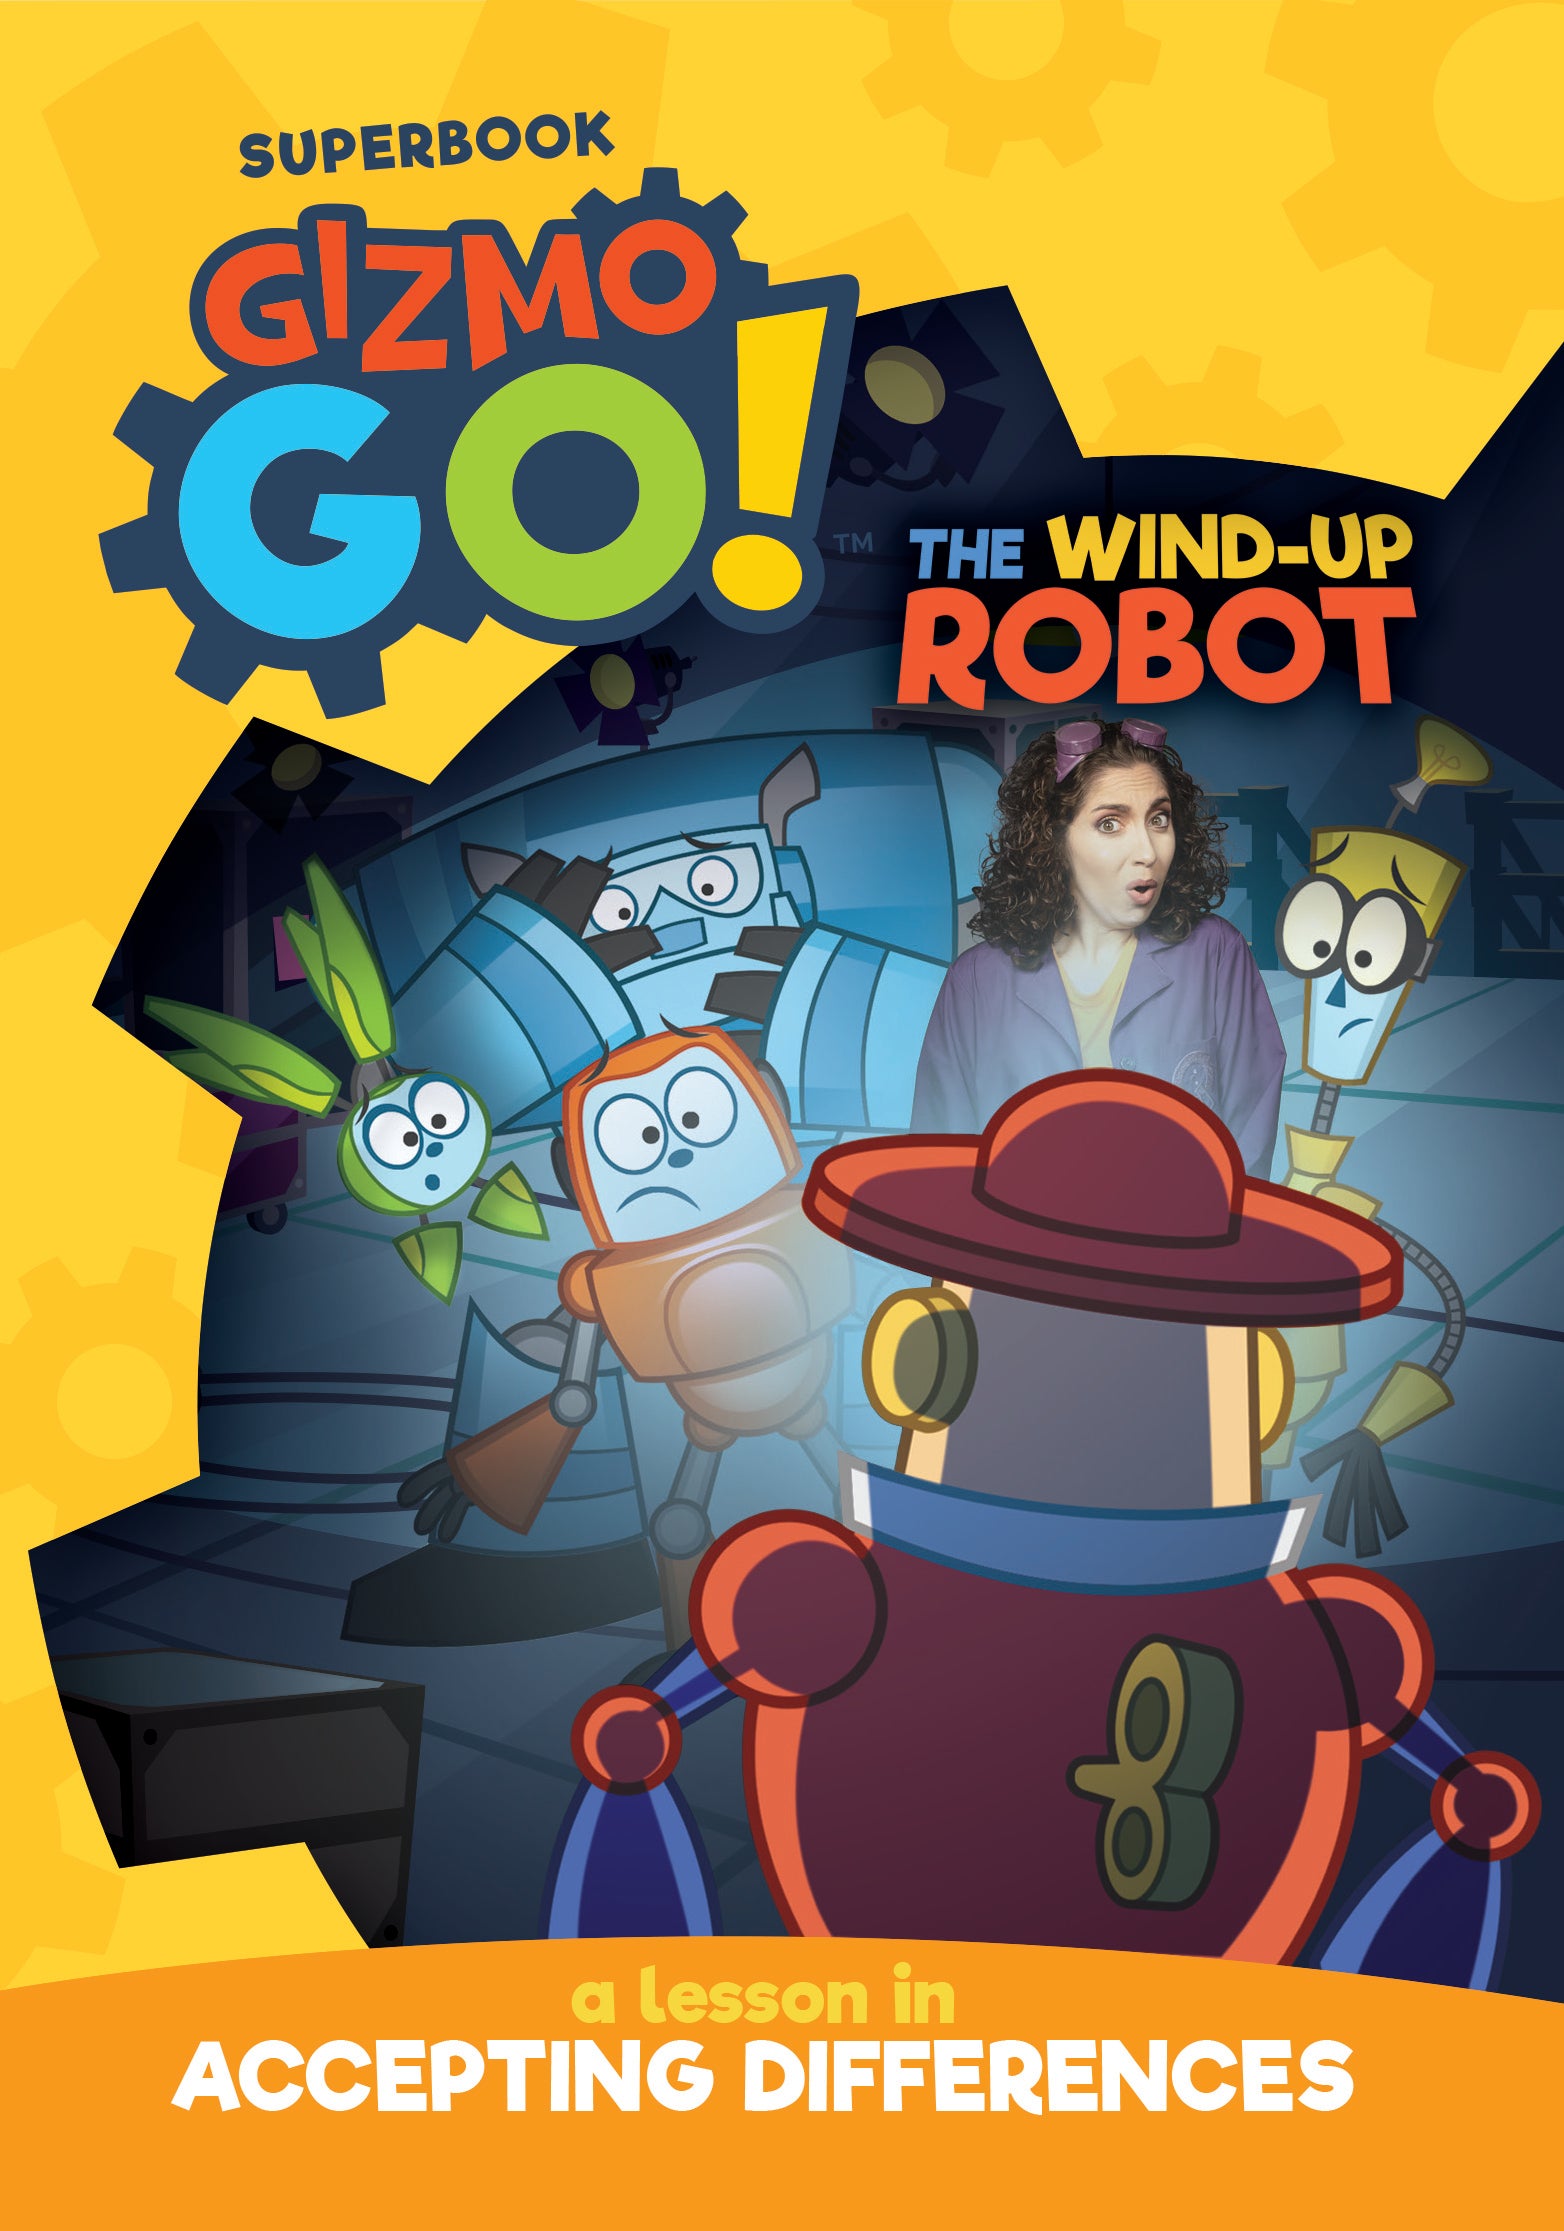 The Wind-Up Robot